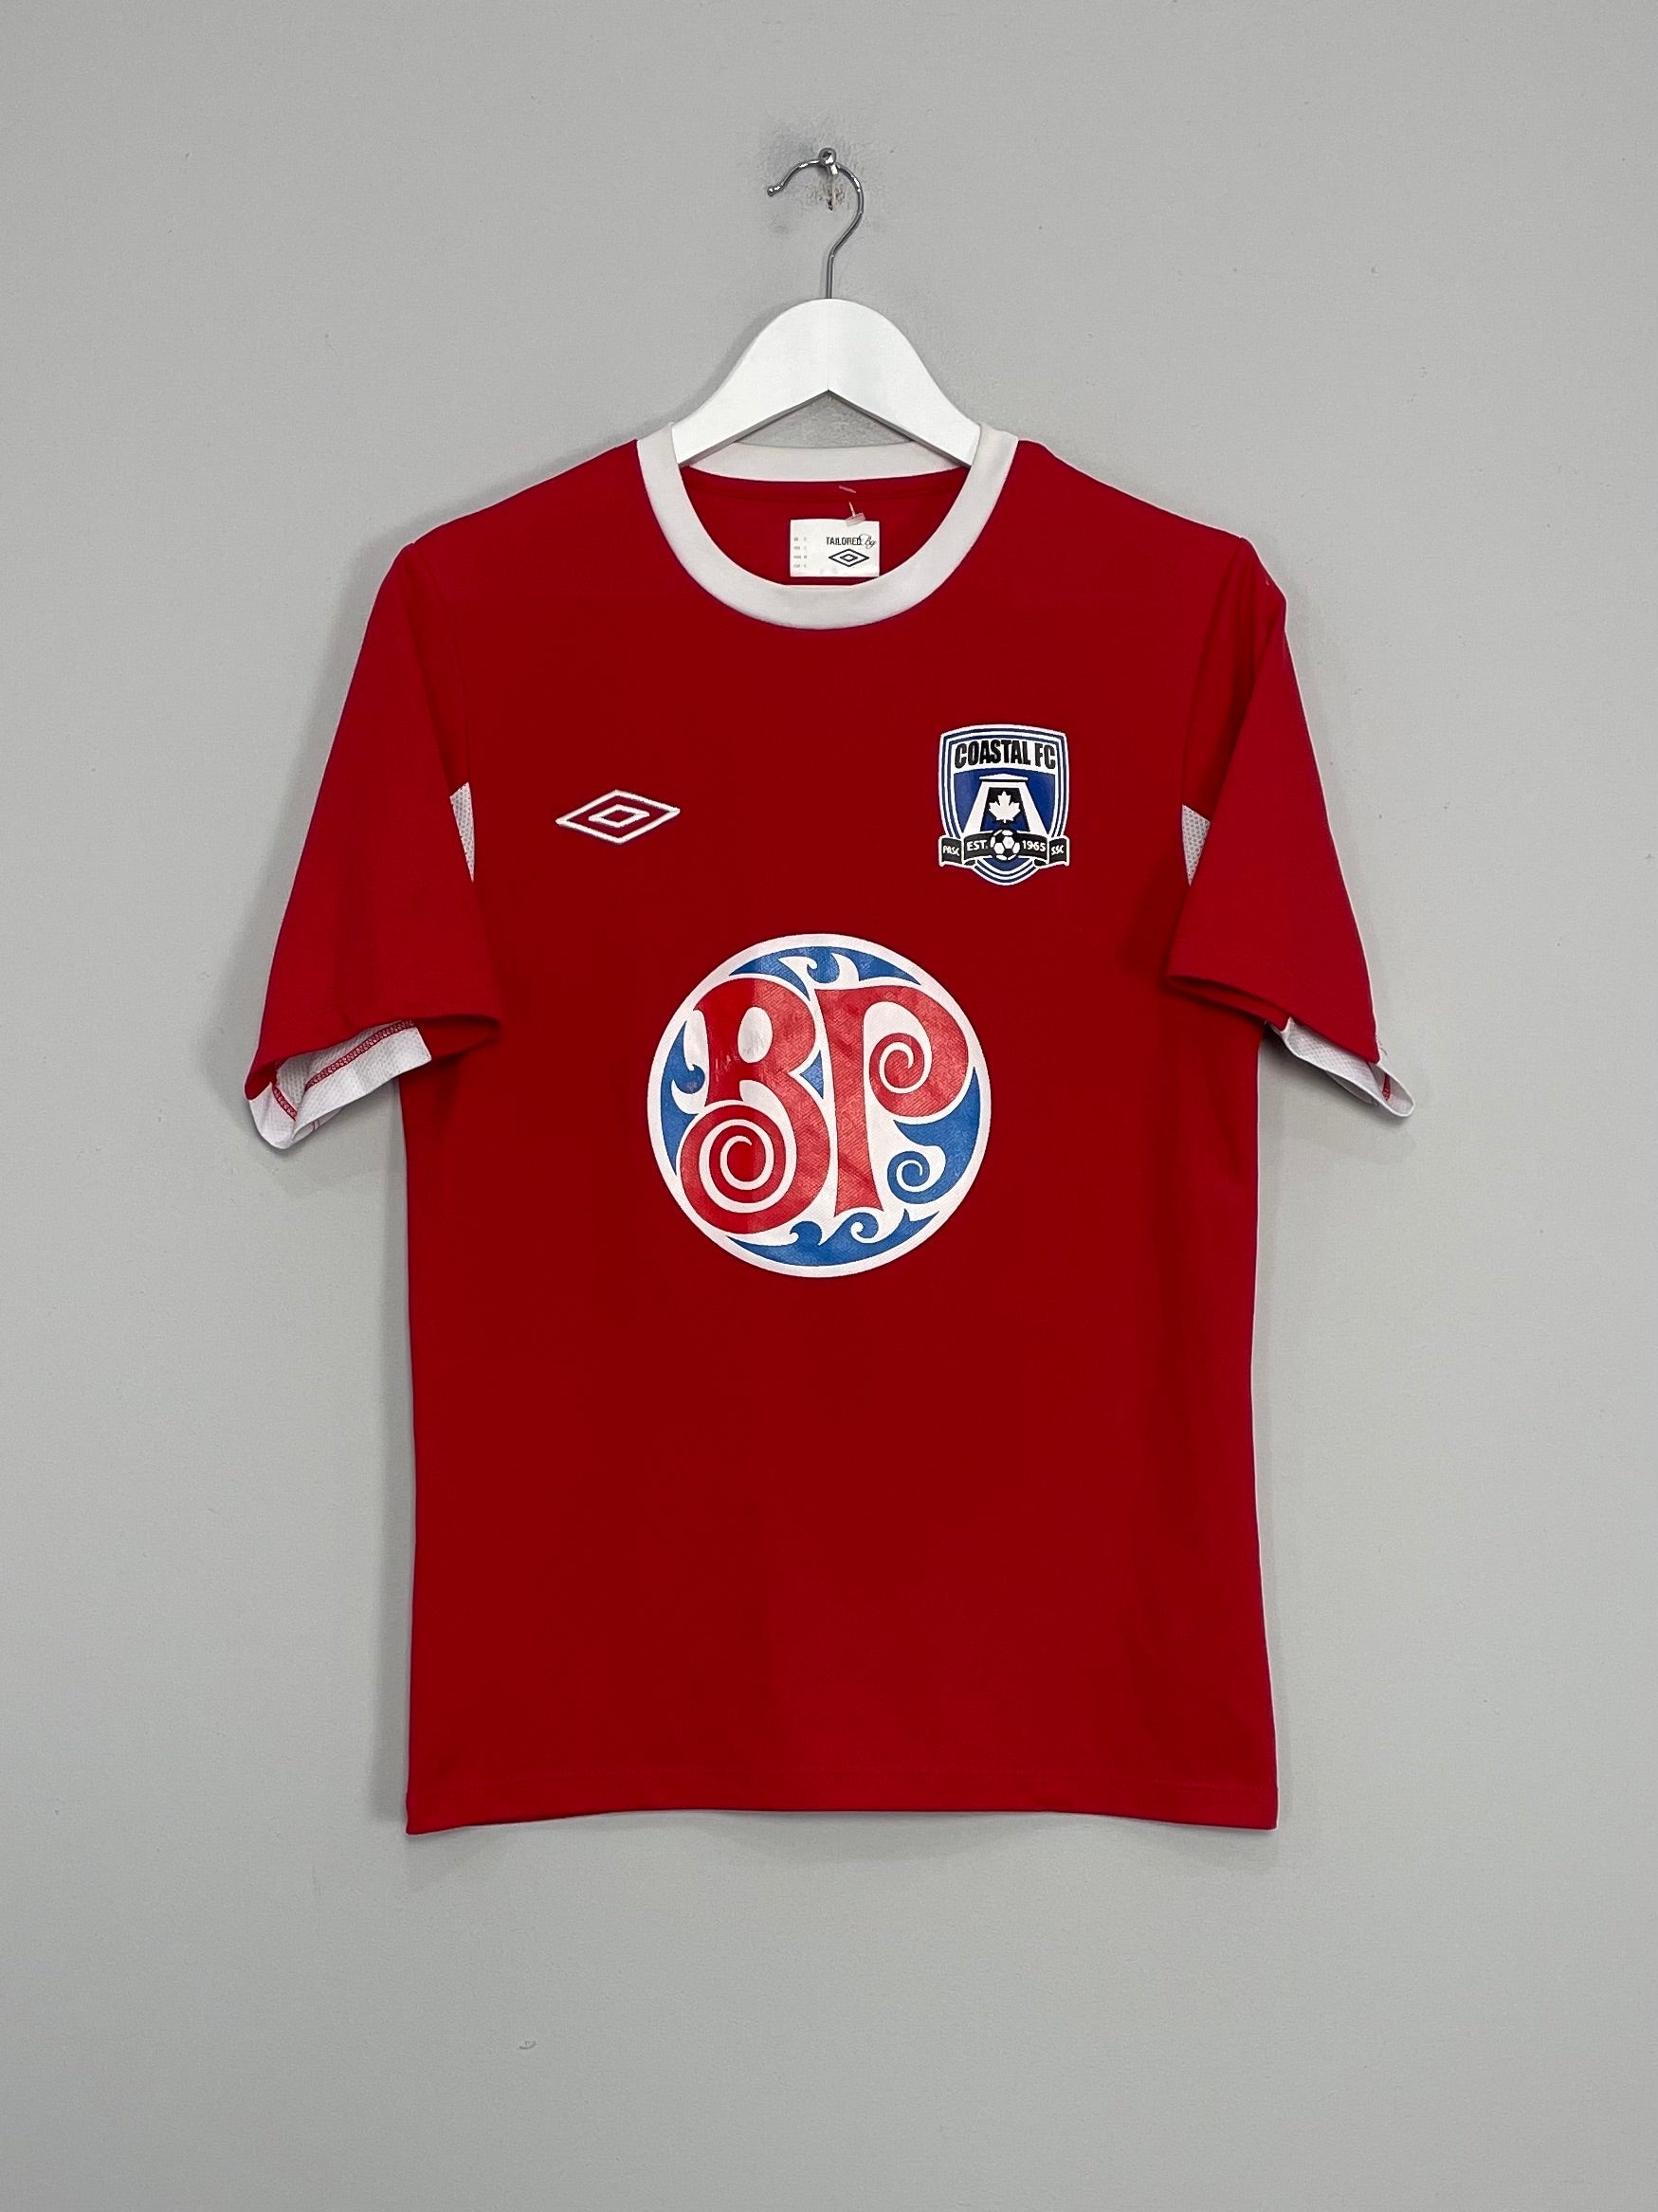 Image of the Coastal fc shirt from the 2012/13